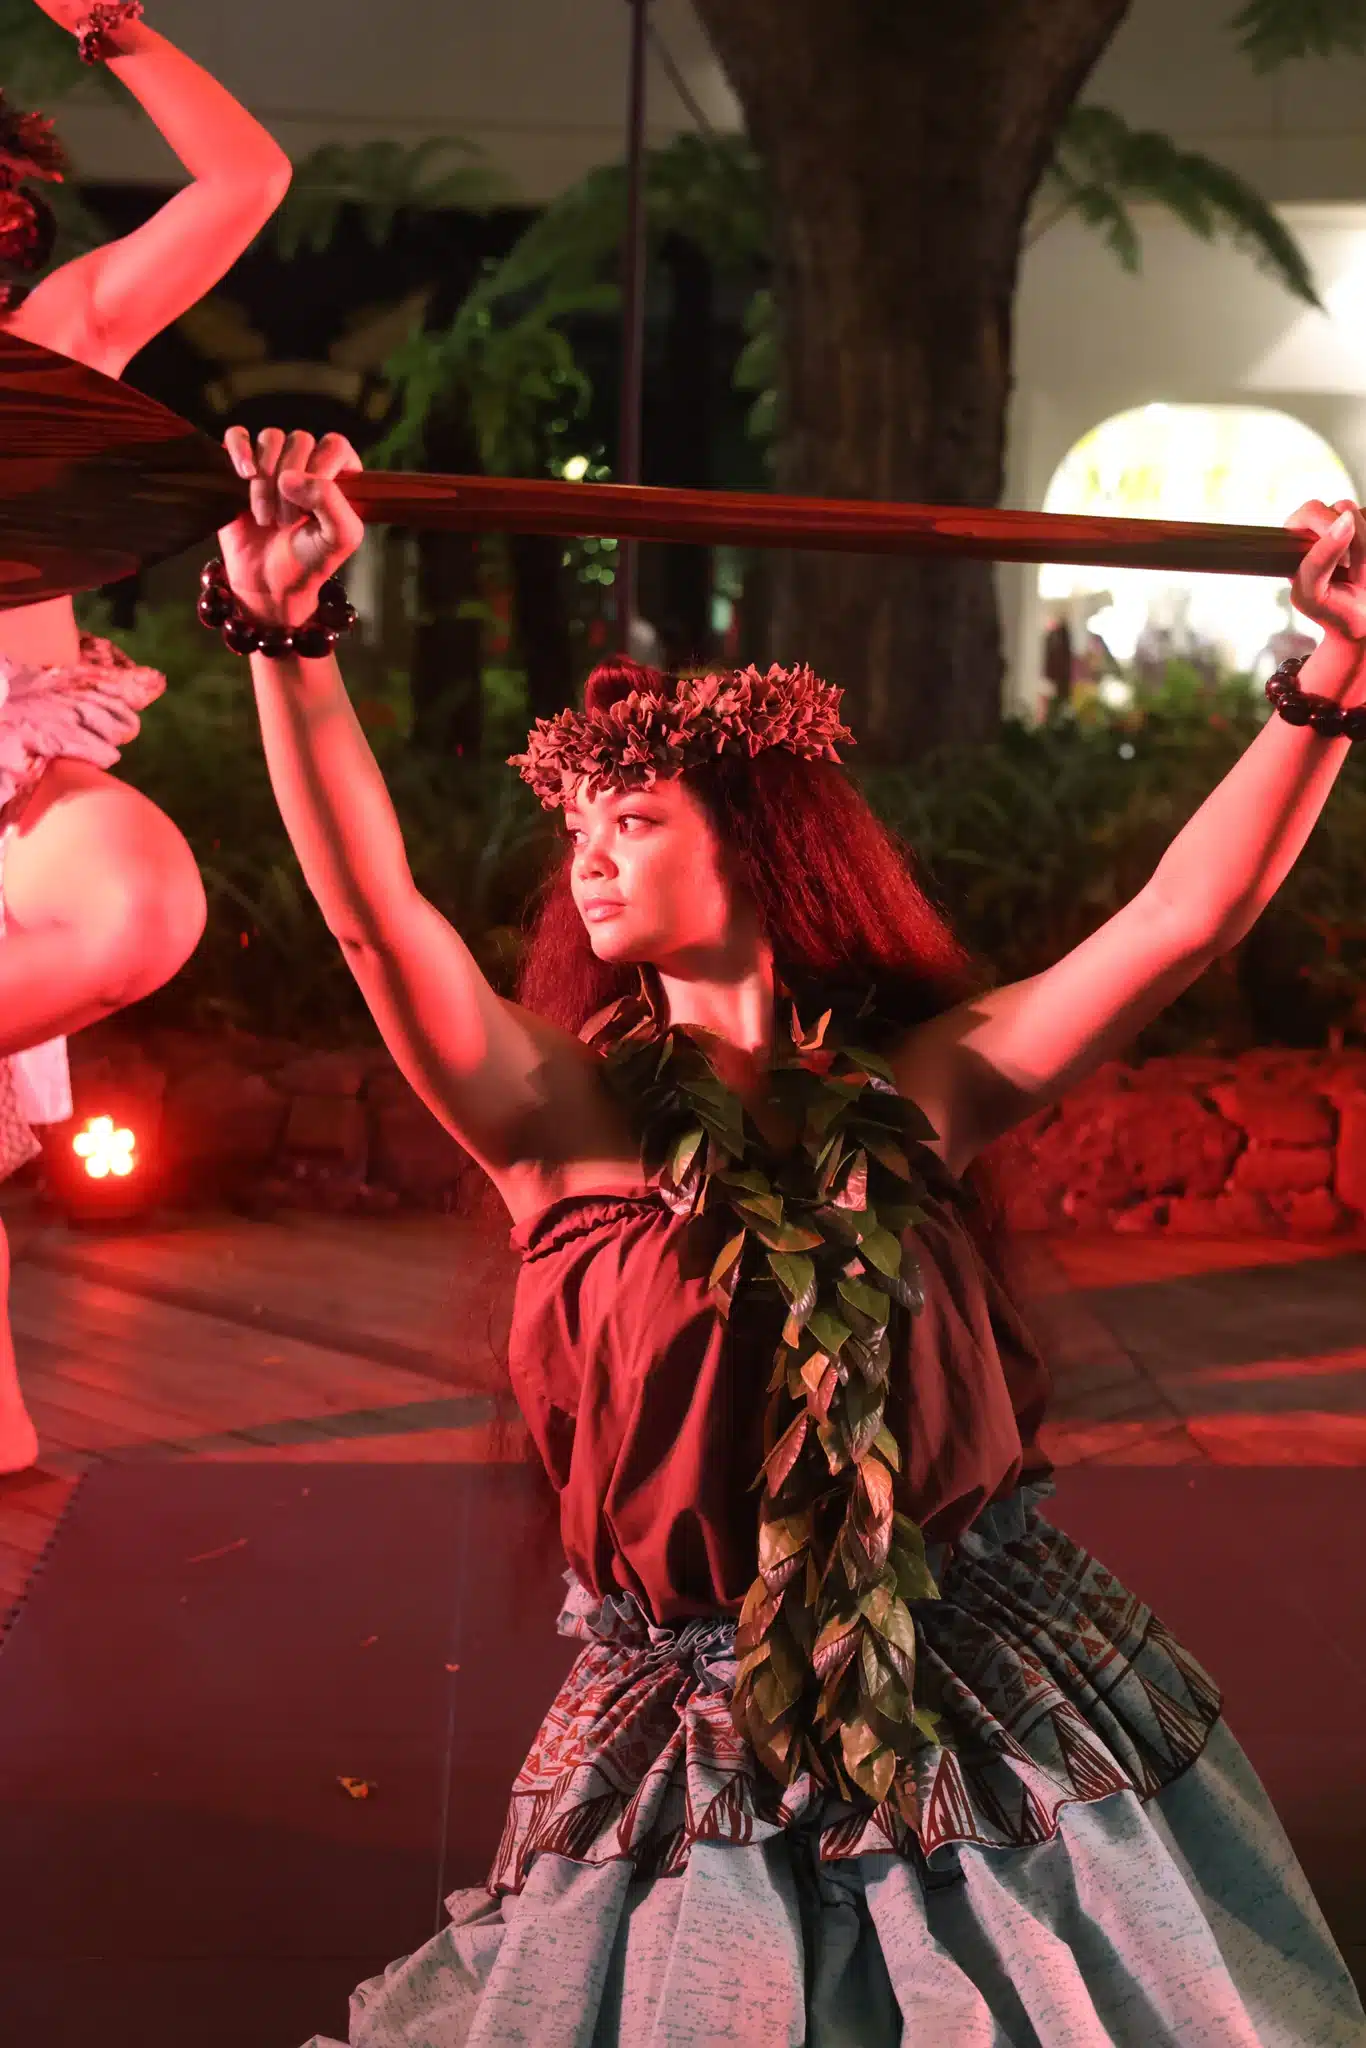 Queens Waikiki Luau is a Cultural Activity located in the city of Honolulu on Oahu, Hawaii